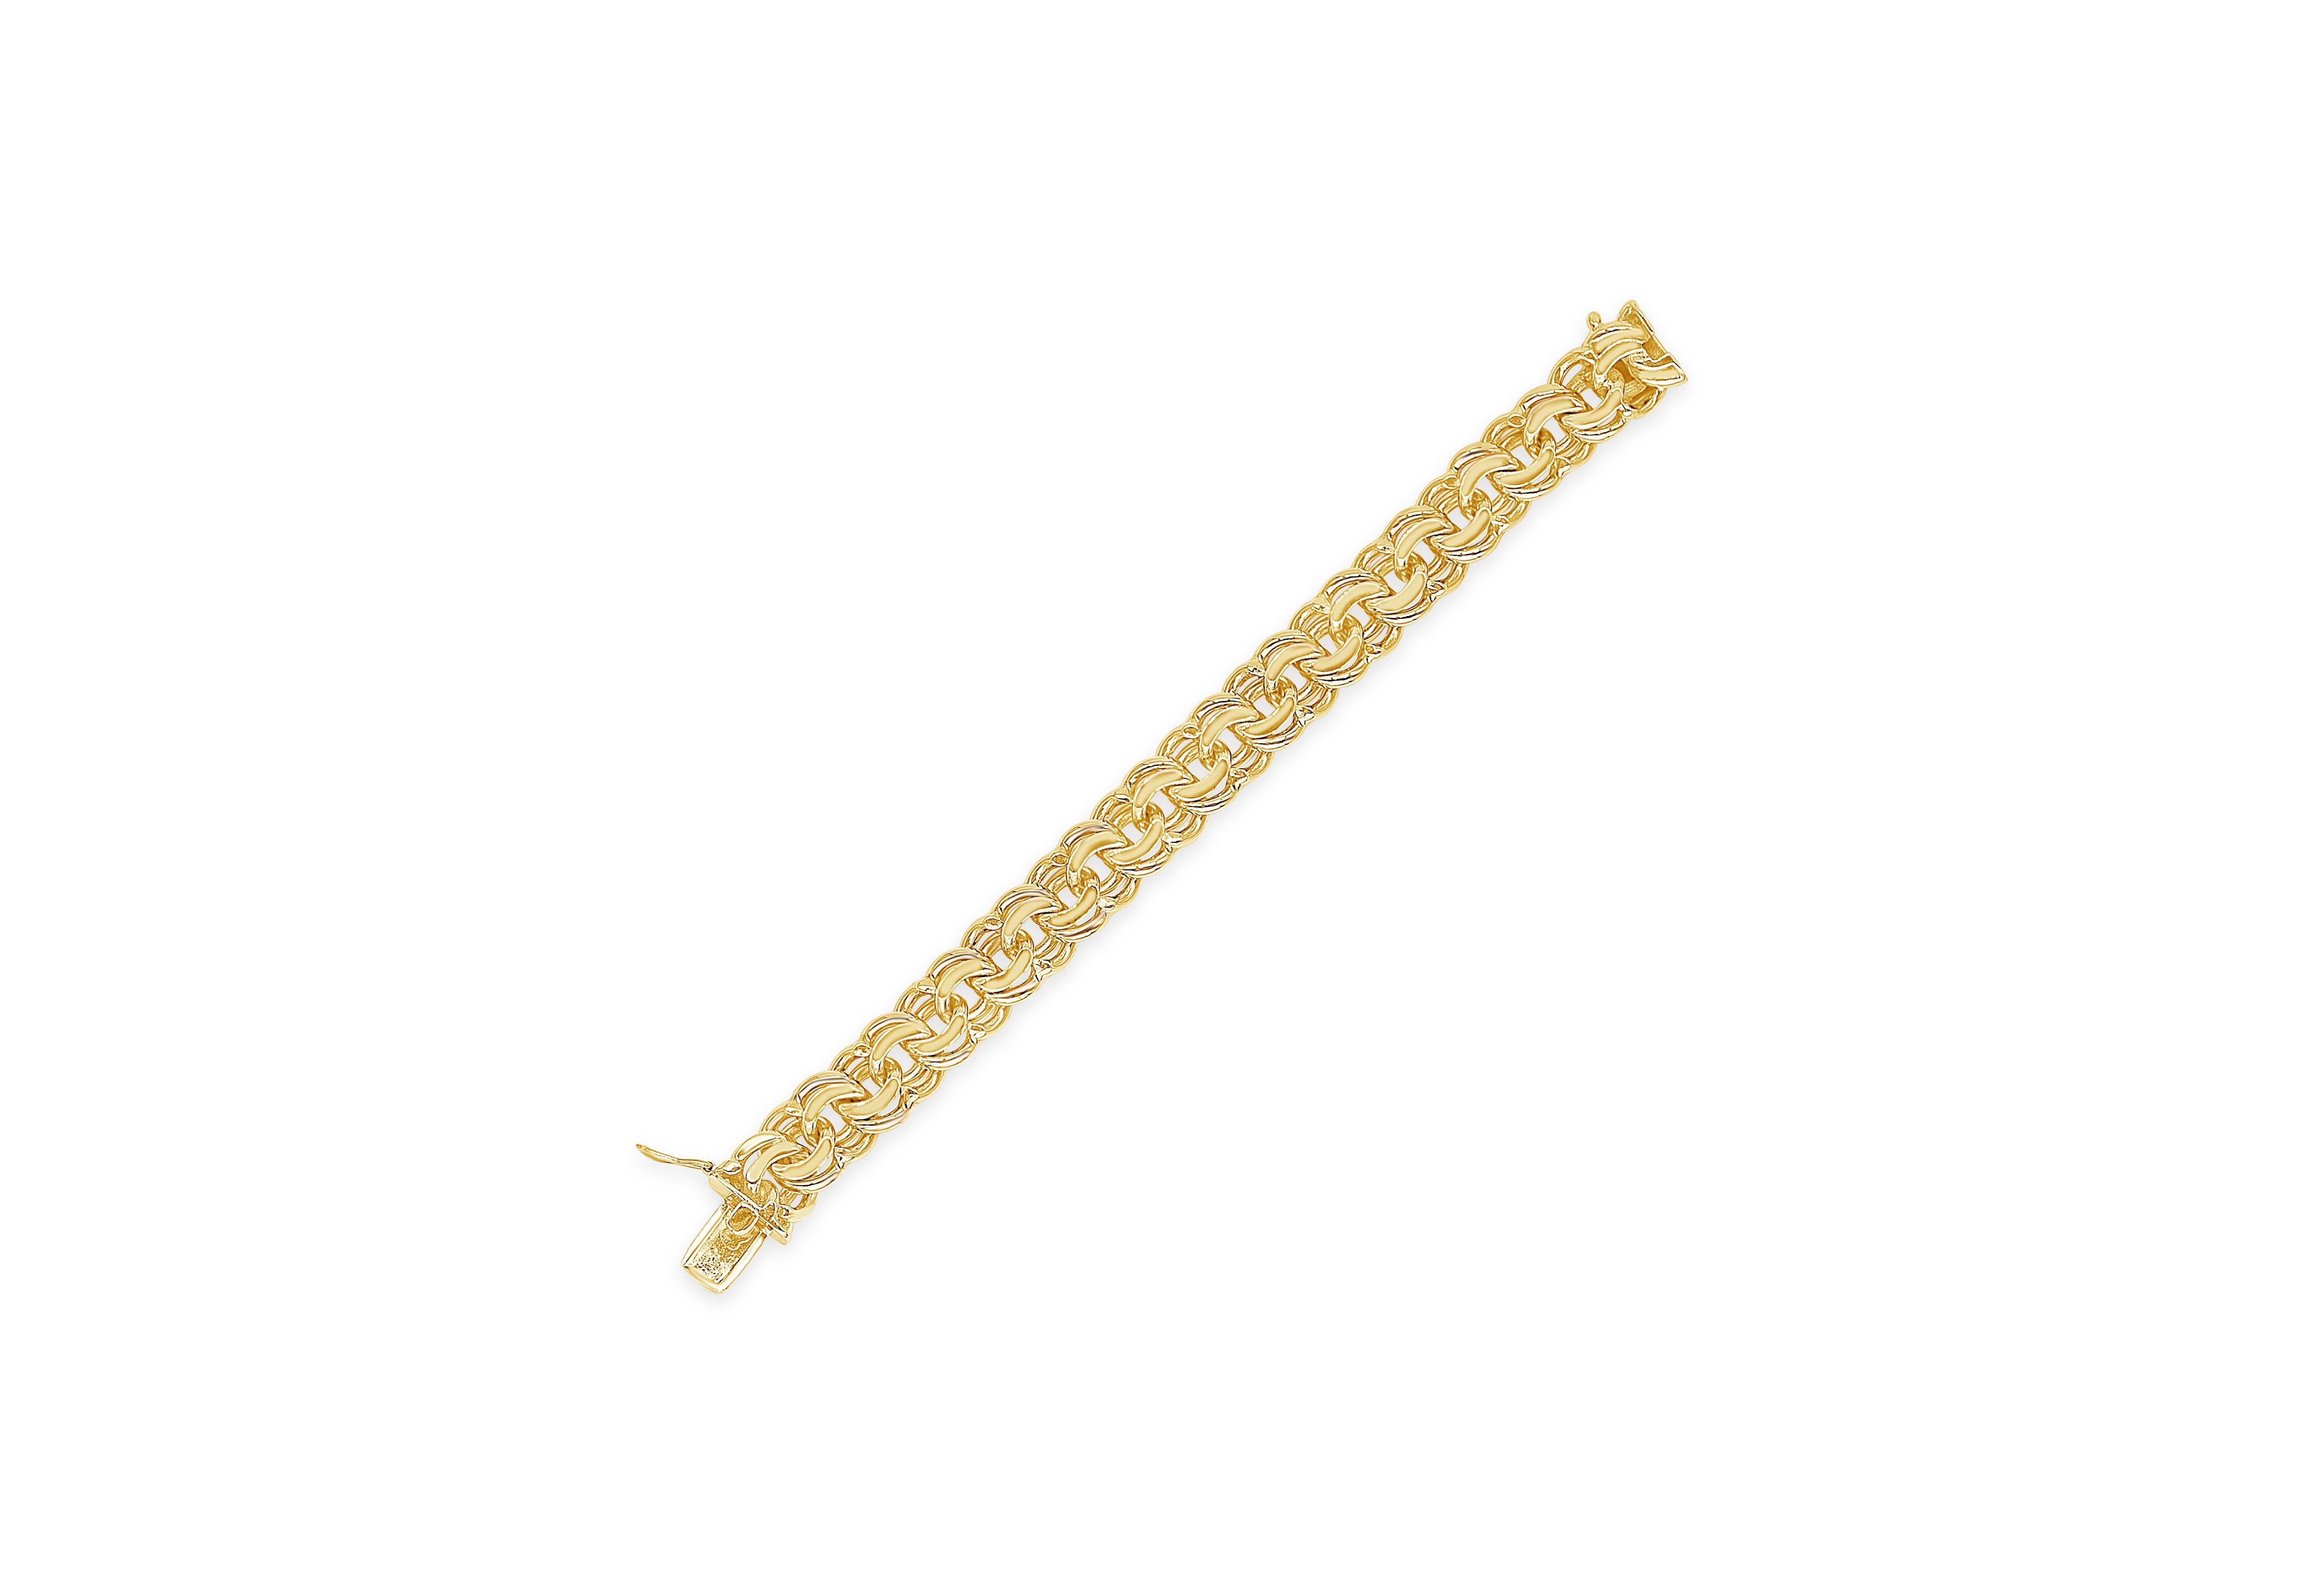 A simple bracelet of intertwined links made of 14K yellow gold. The links feature a looping design. This bracelet weighs 69.15 grams, and measures 7.25 inches in length and 0.53 inches in width. 



